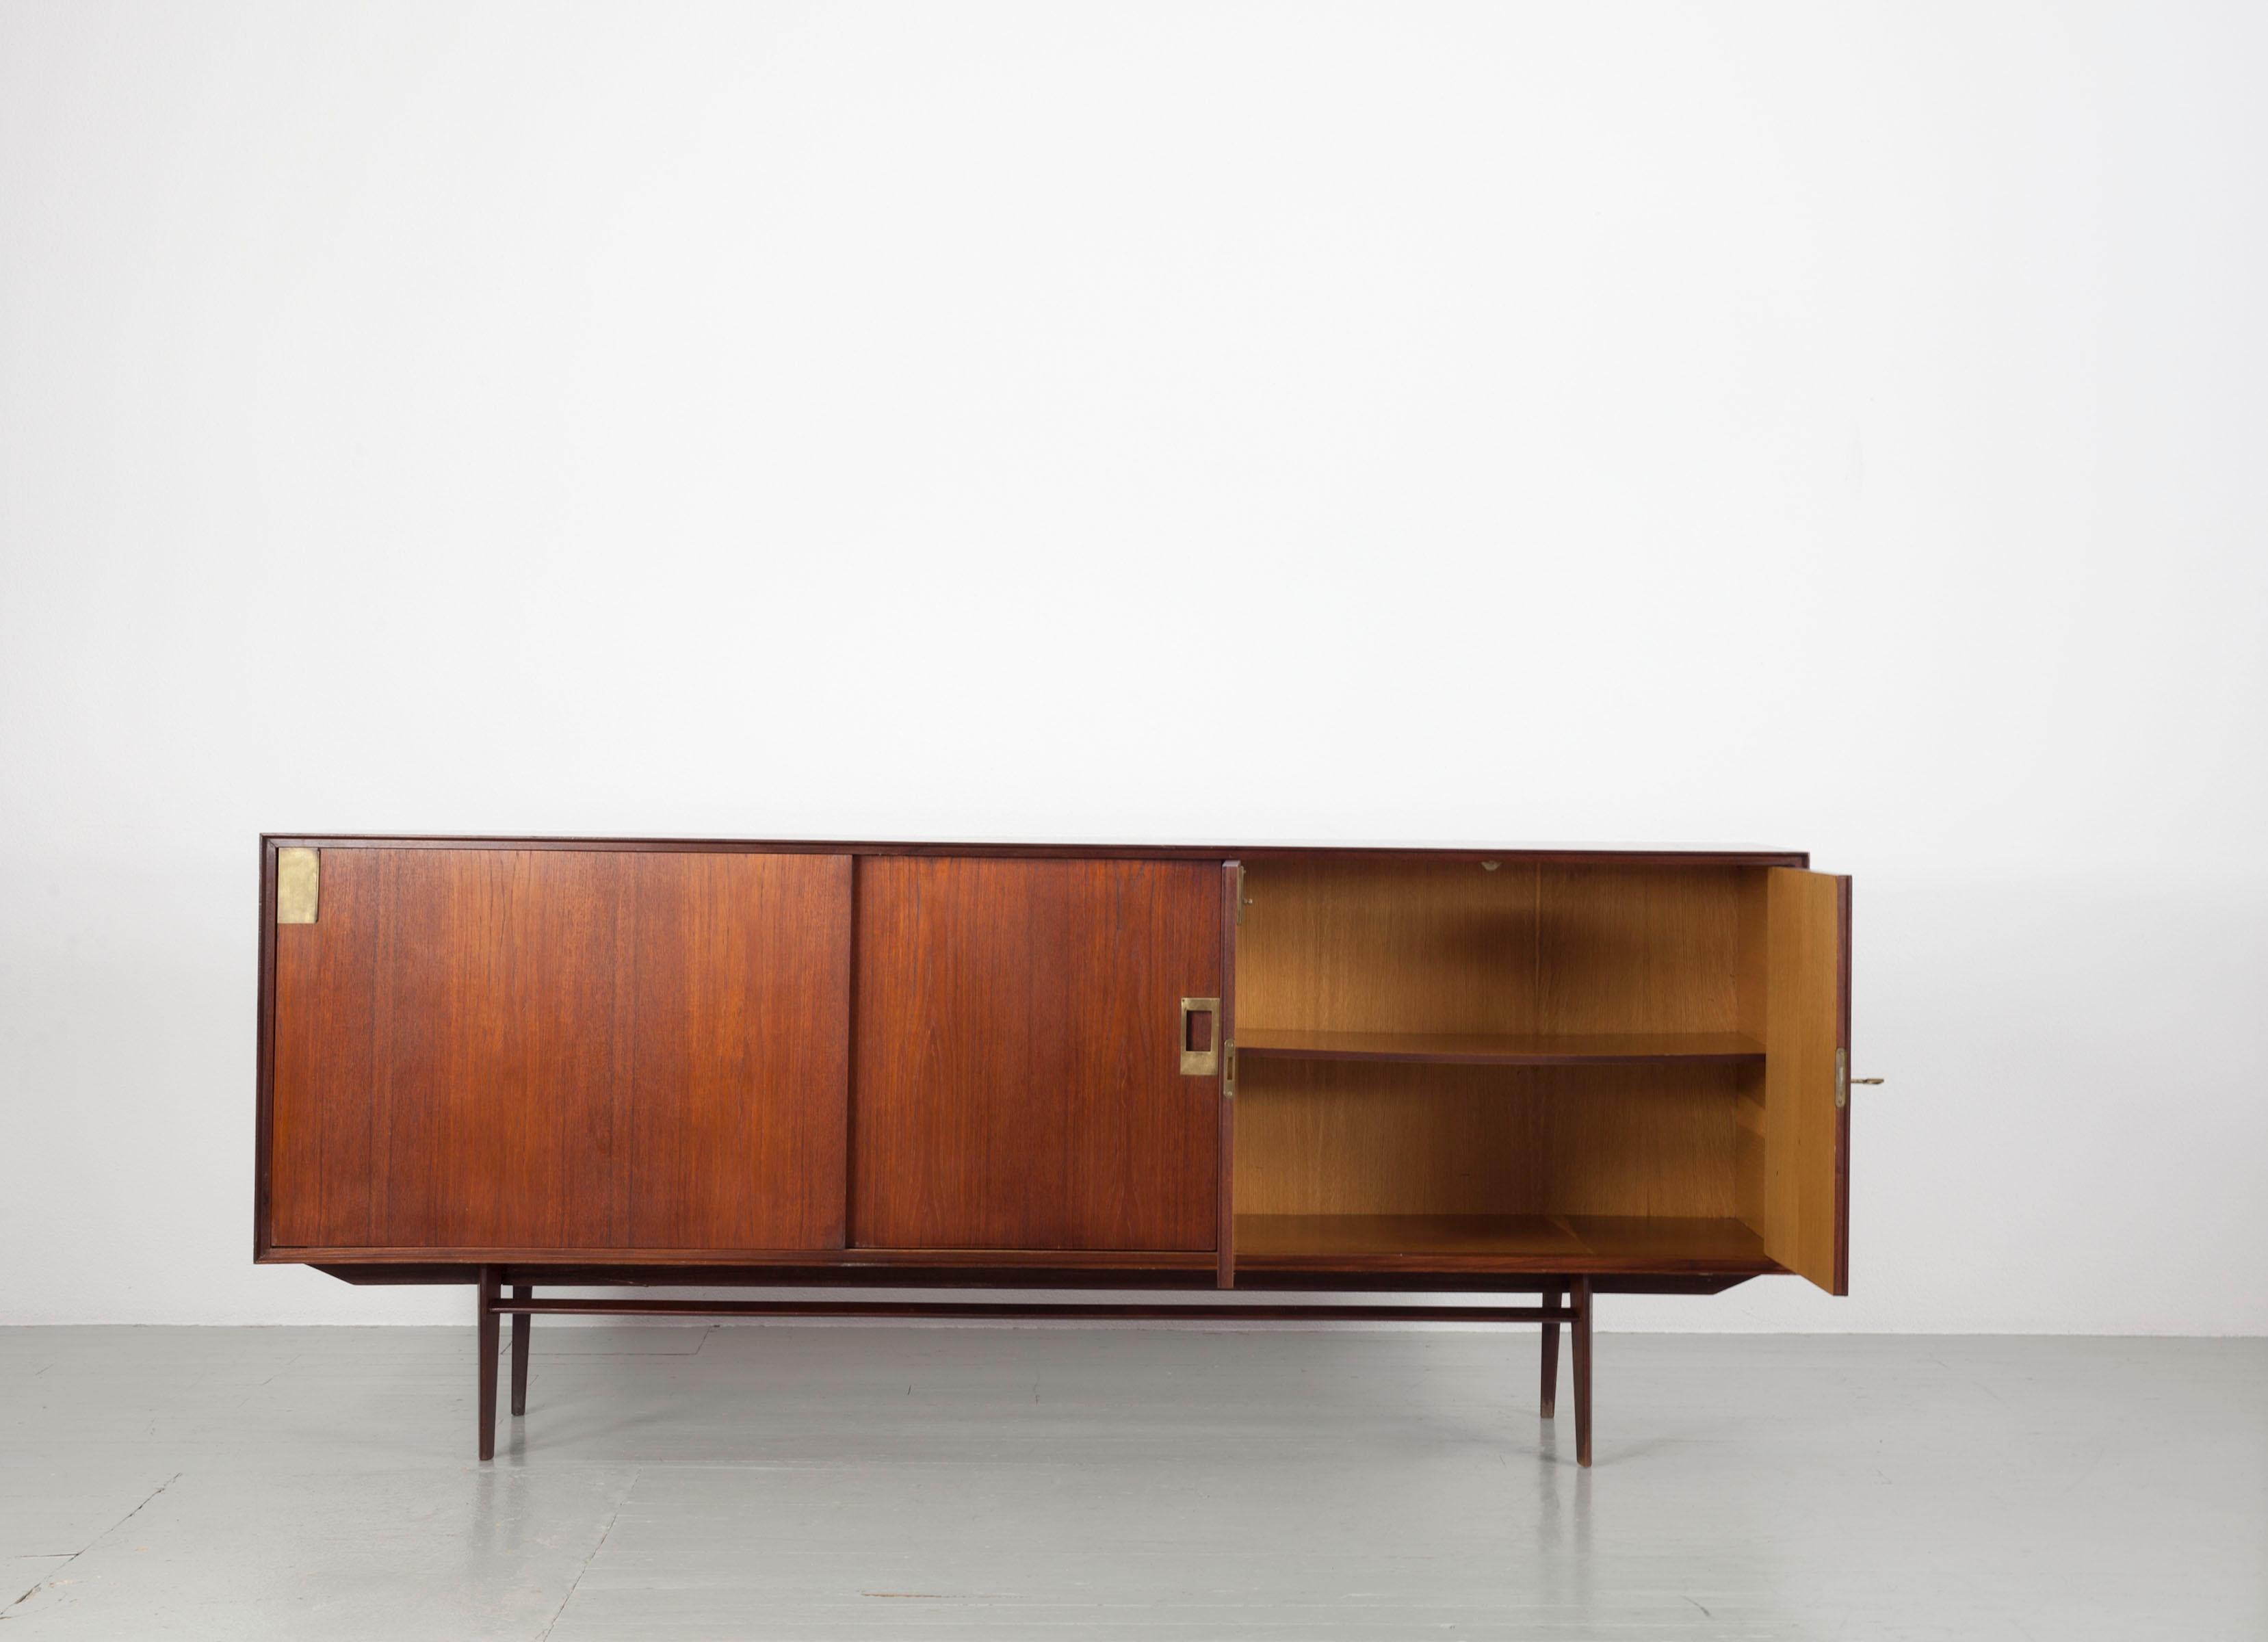 Edmondo Palutari Dassi sideboard
This sideboard has been crafted with teak and brass detailing. The versatile sideboard offers plenty of room for storage and remains in a very good vintage condition. Edmondo Palutari worked internally at the Dassi